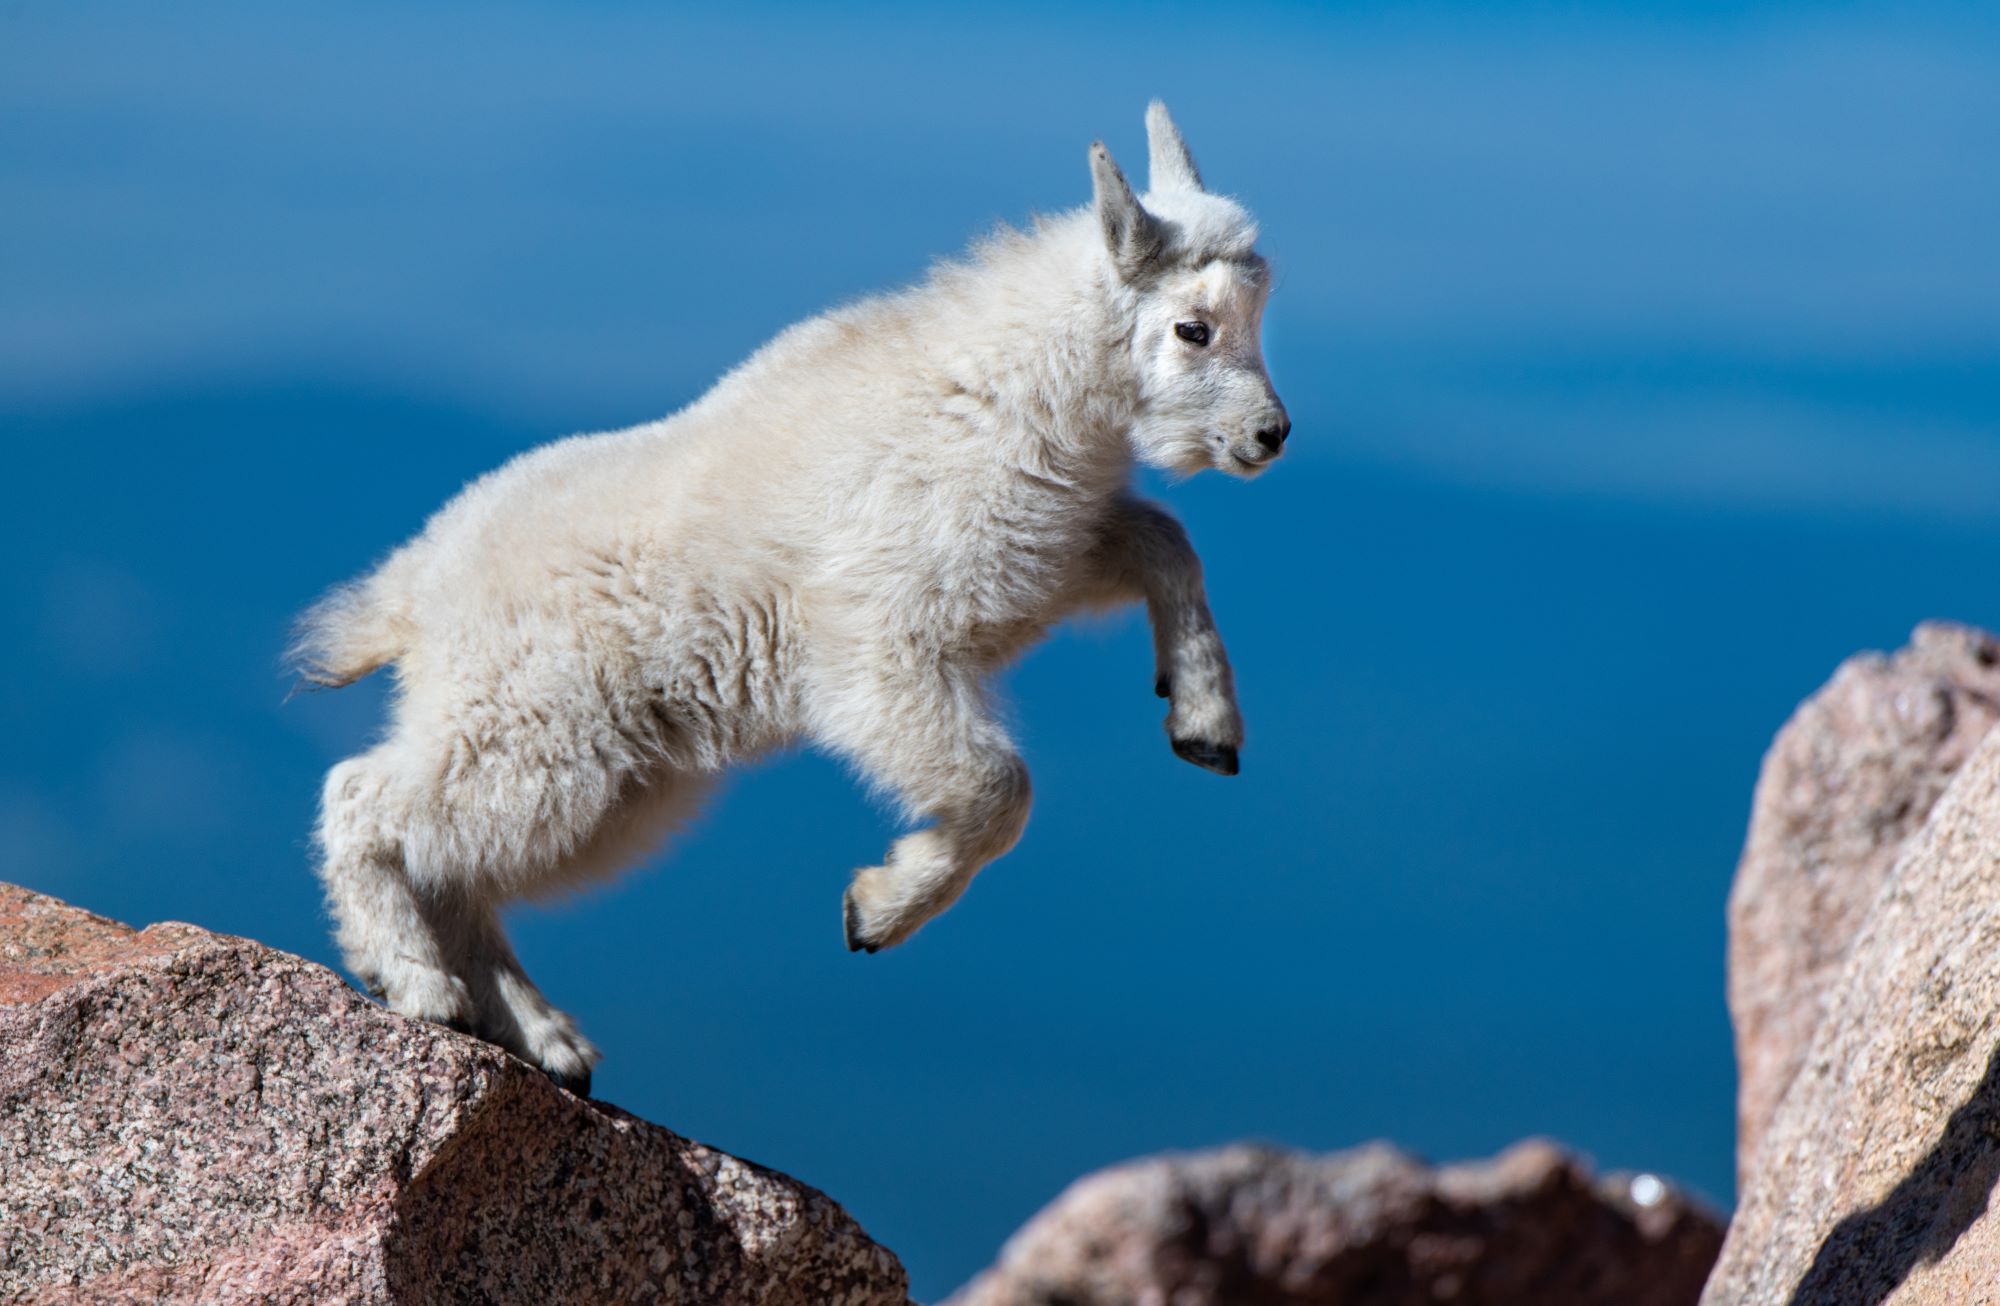 A young mountain goat.